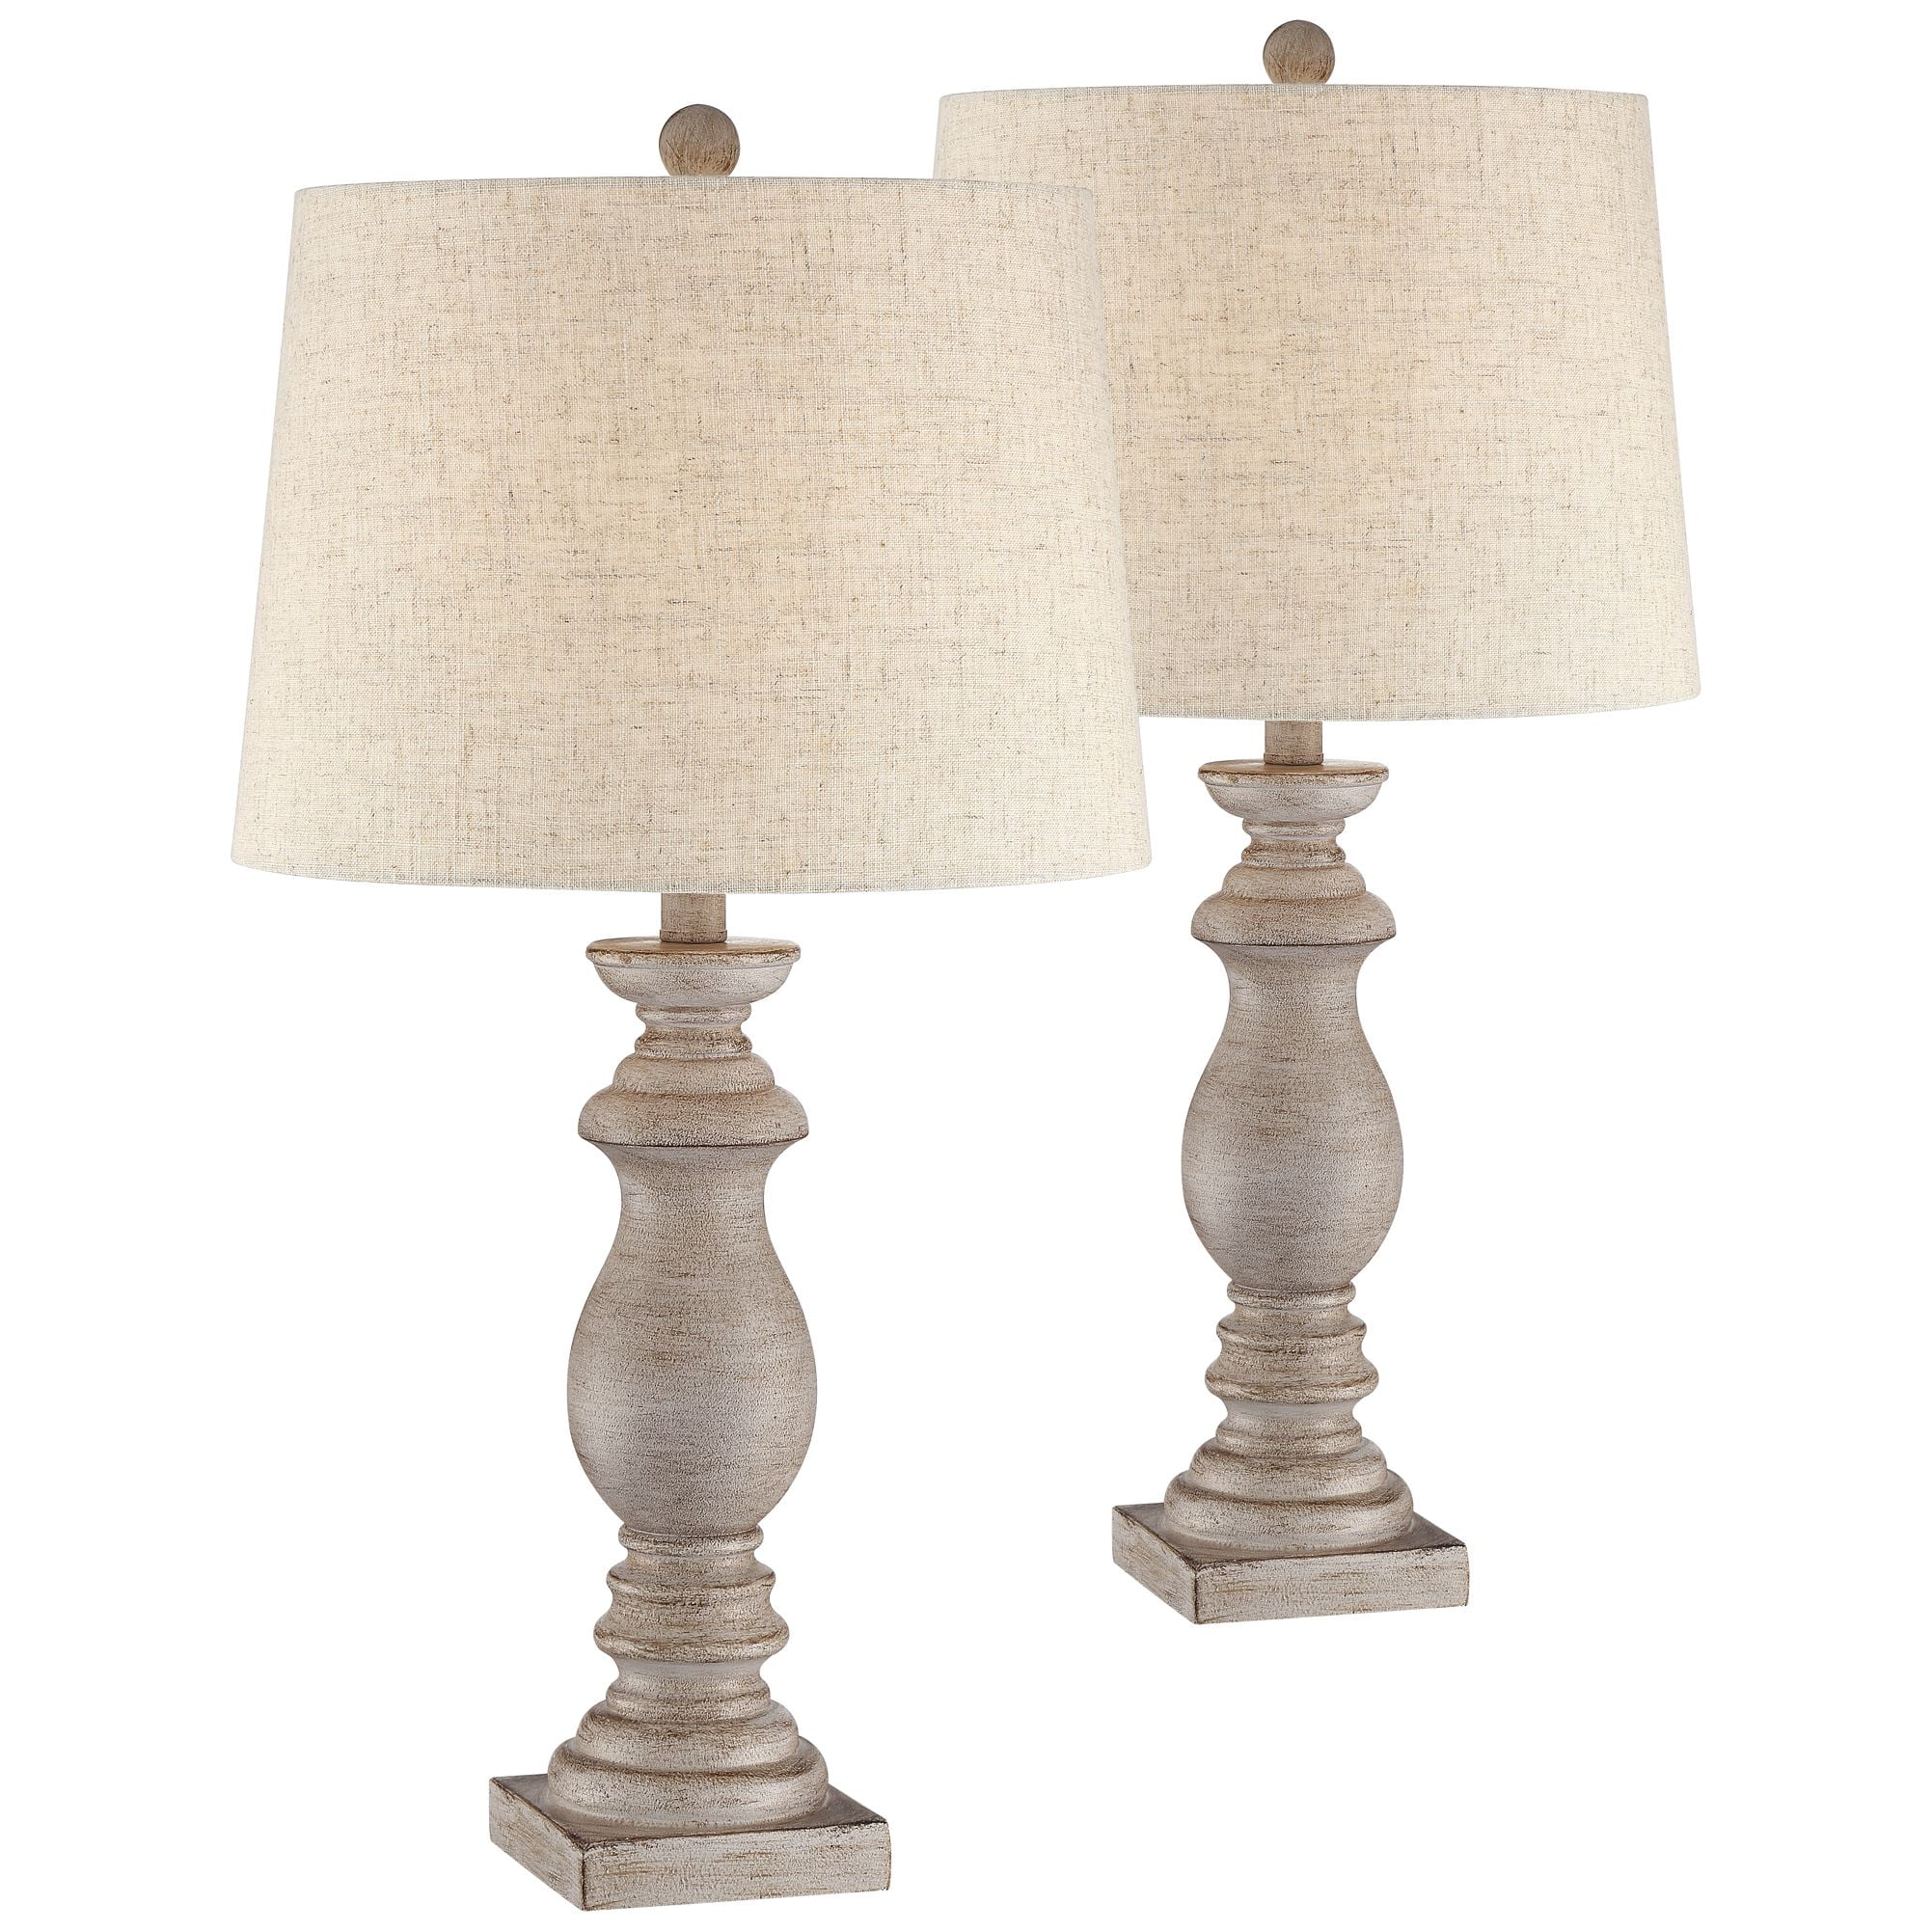 Regency Hill Traditional Table Lamps, Farmhouse Style Bedside Table Lamps